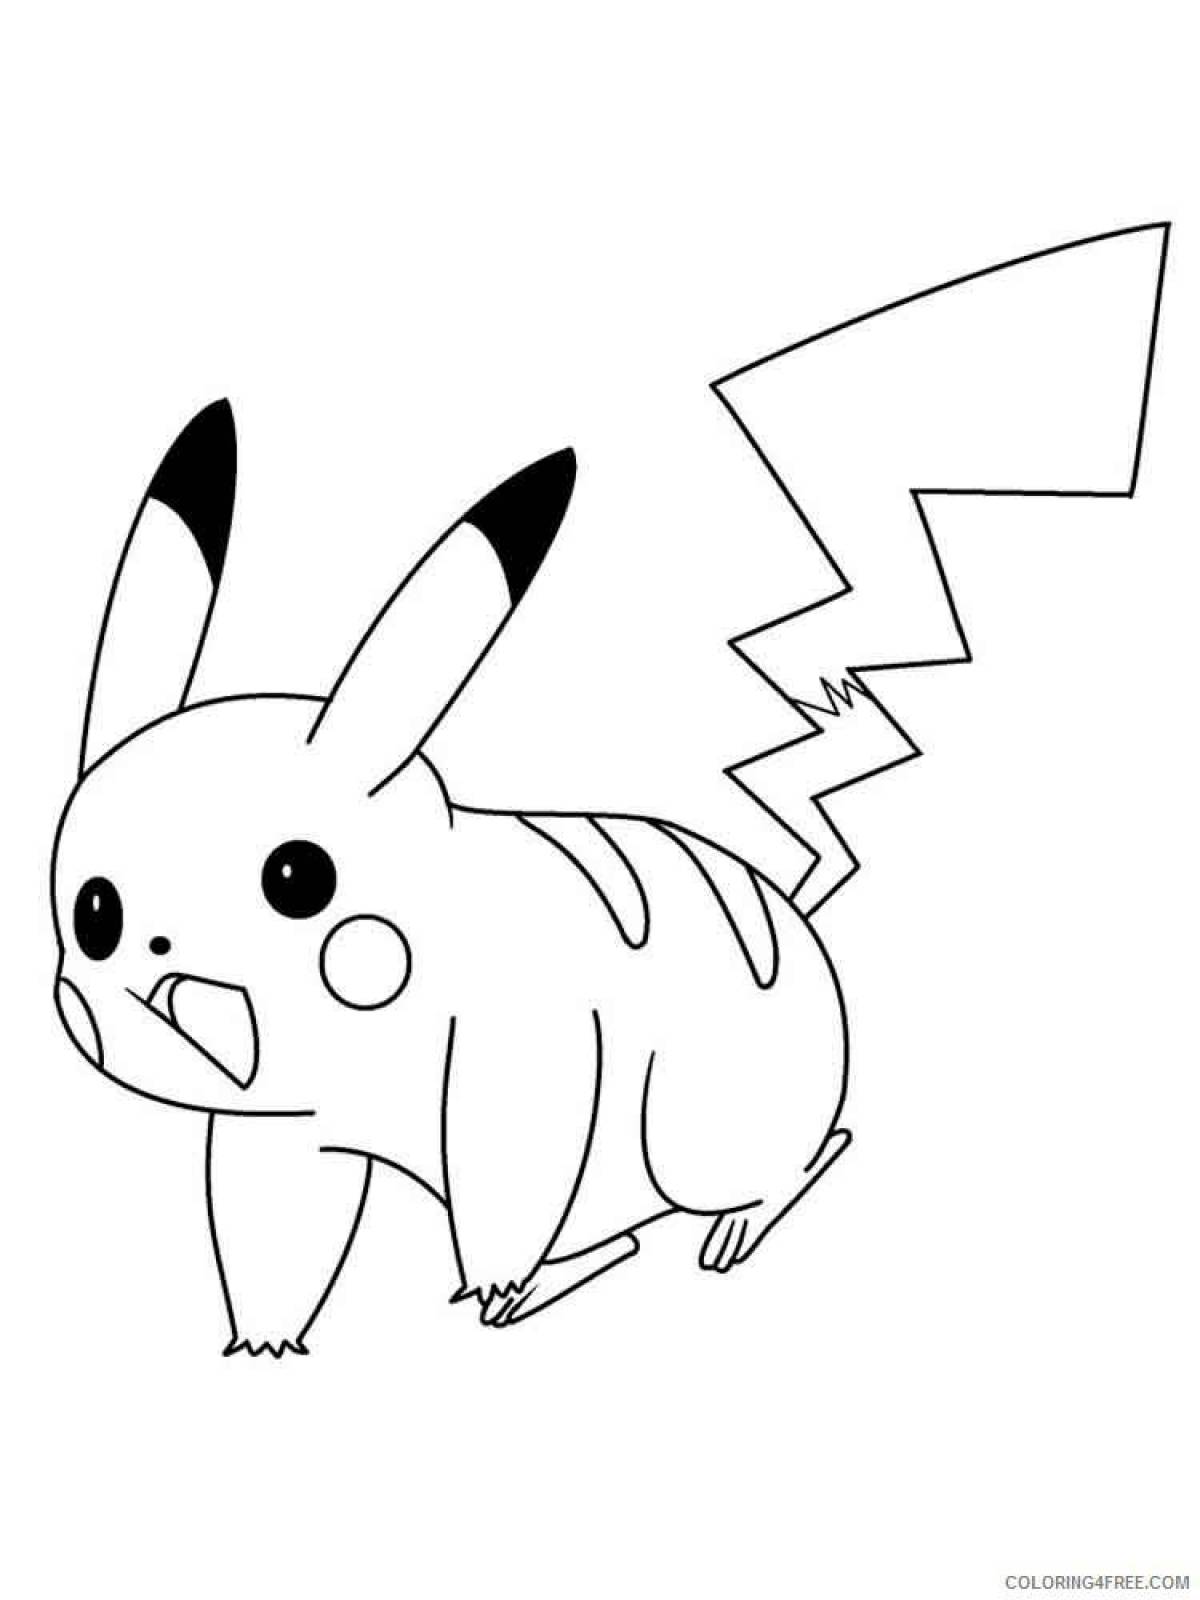 Shining pikachu coloring pages for kids